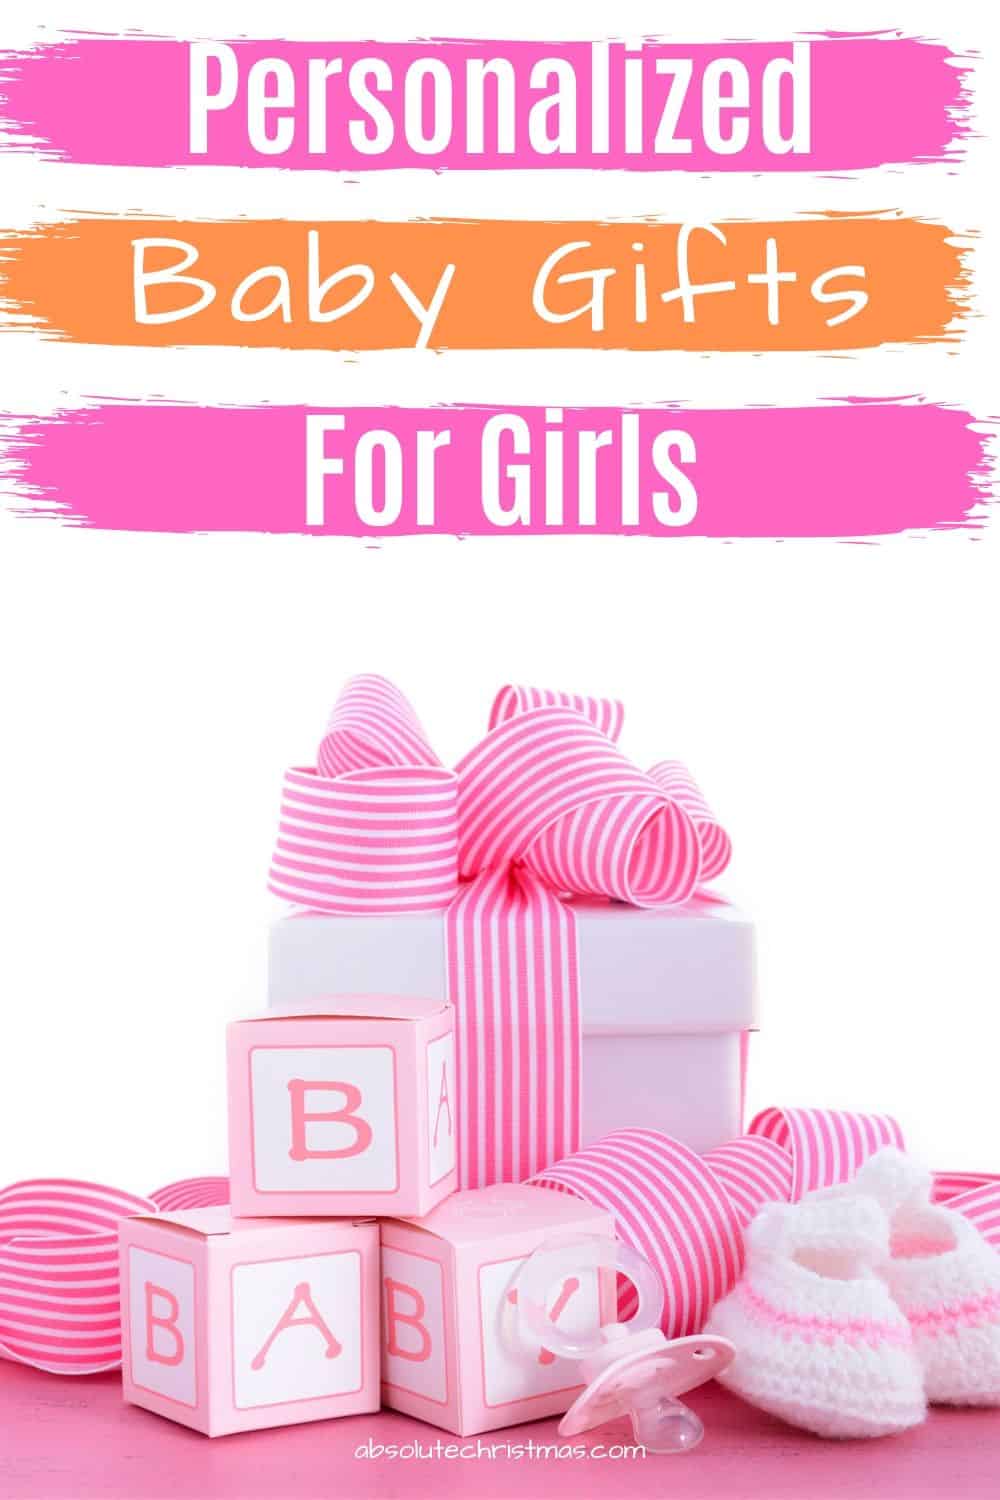 Personalized Baby Gifts for Girls - Baby Girl Gift Ideas